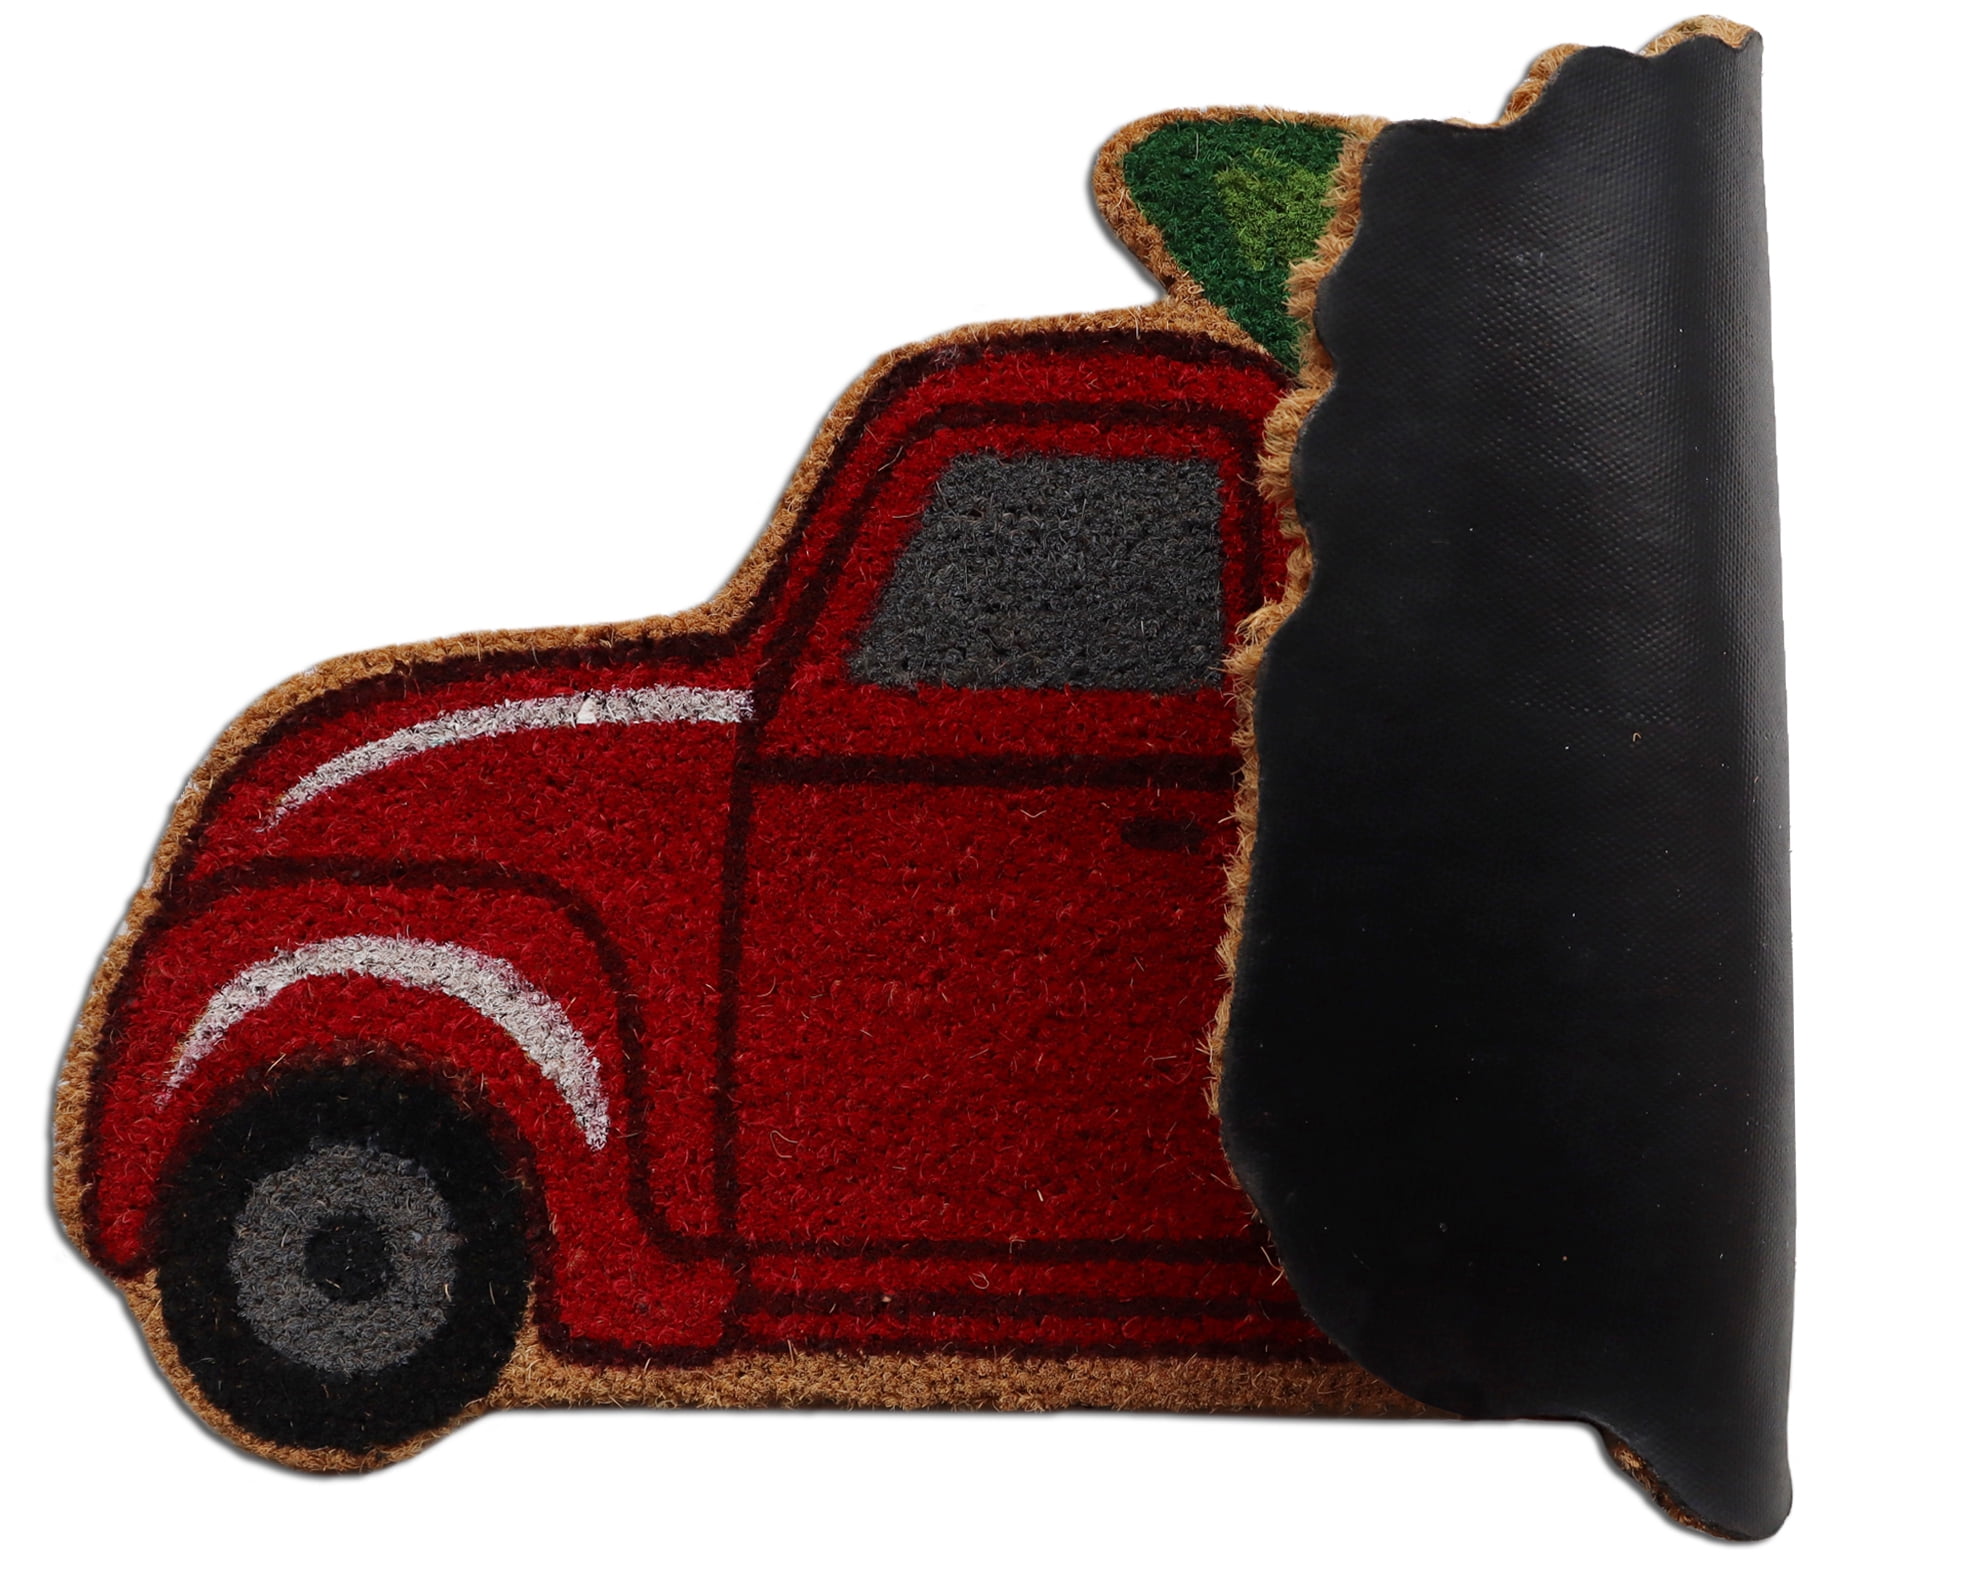 ThisWear Winter Doormat Hello Winter Decor Holiday Party Supplies Classic  Red Truck with Tree Doormat Multi